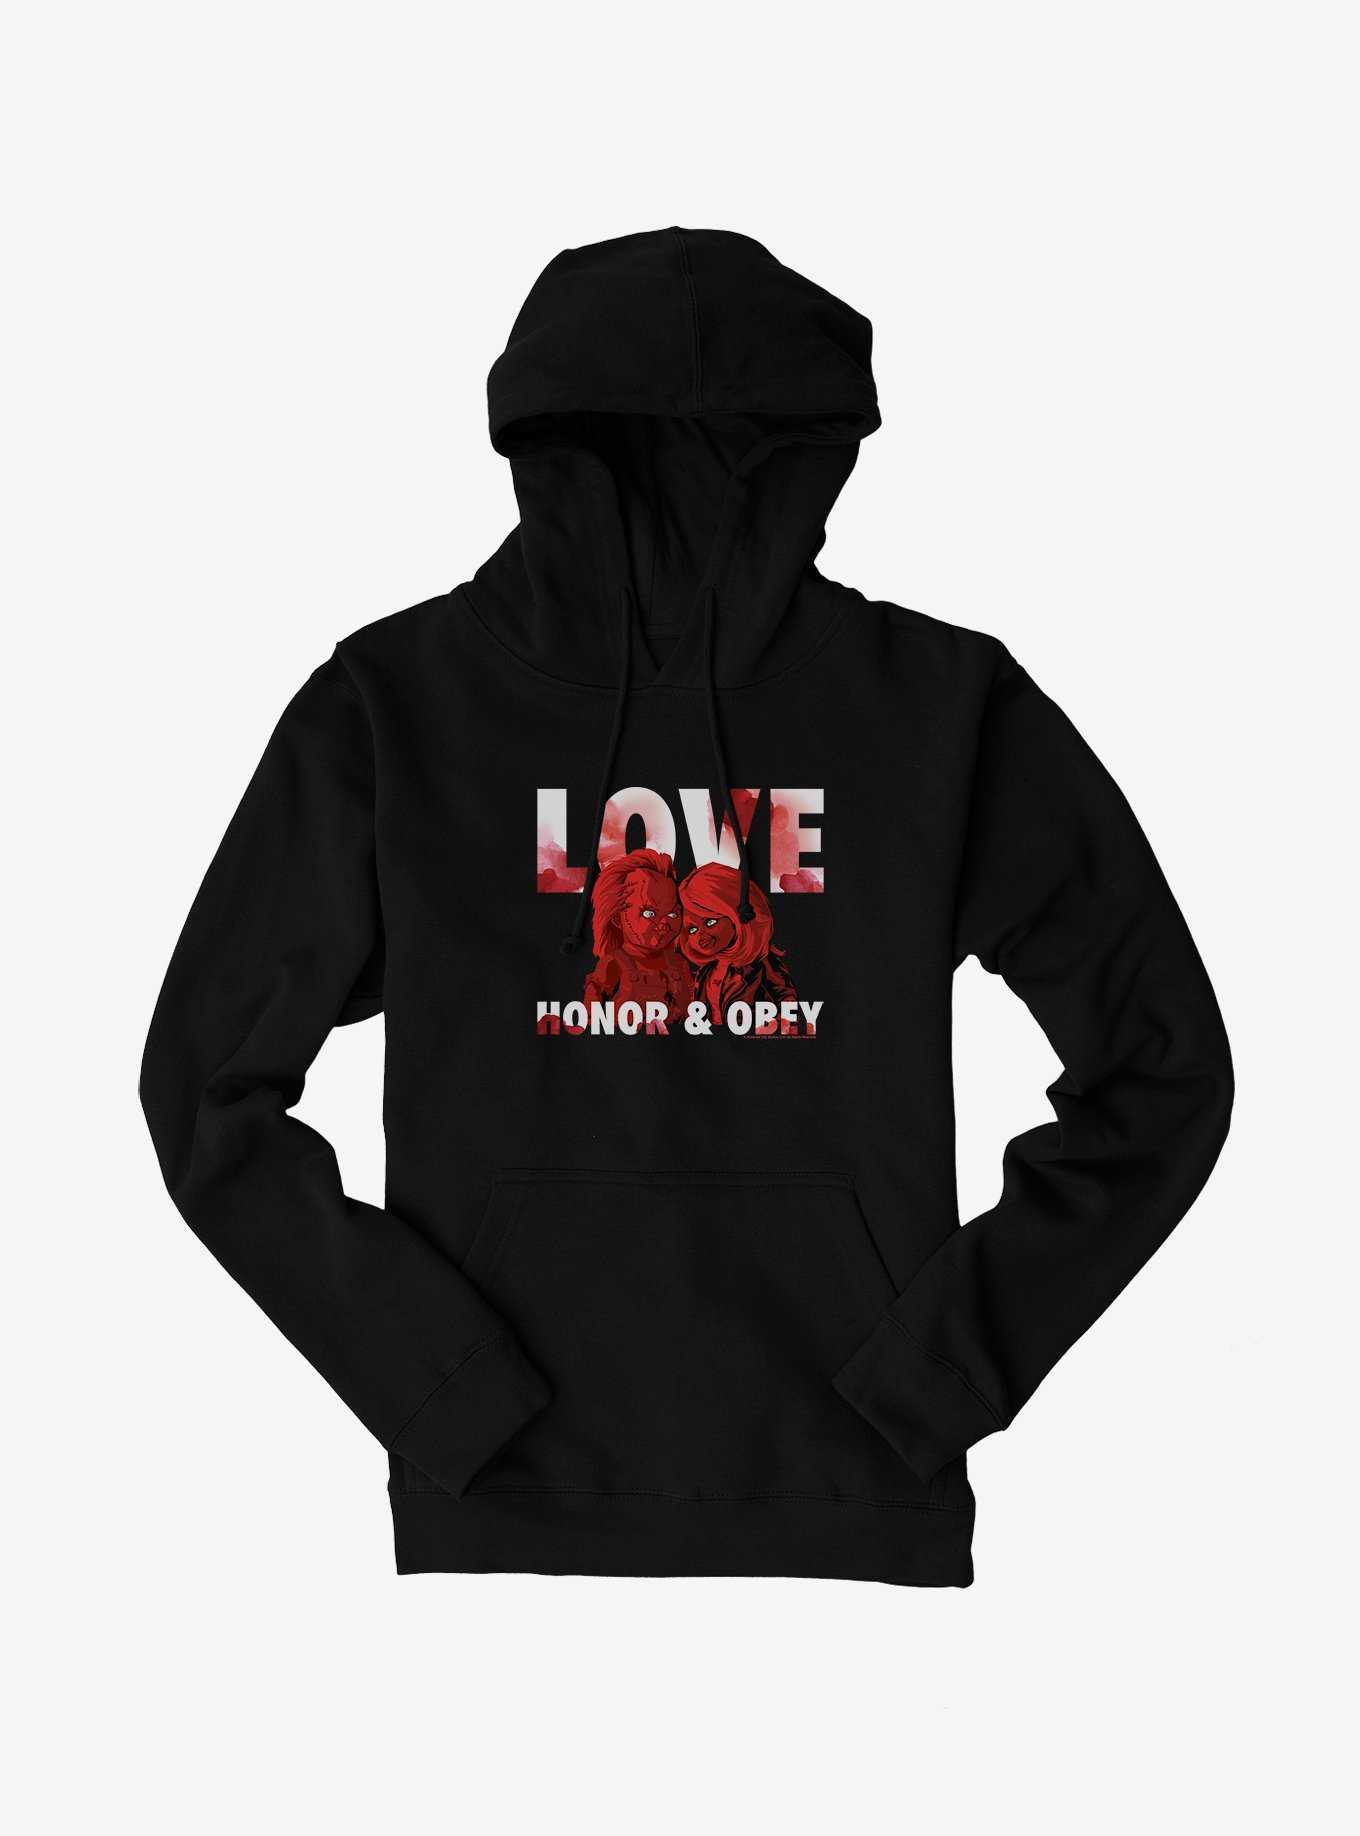 Chucky Love, Honor & Obey Hoodie, , hi-res